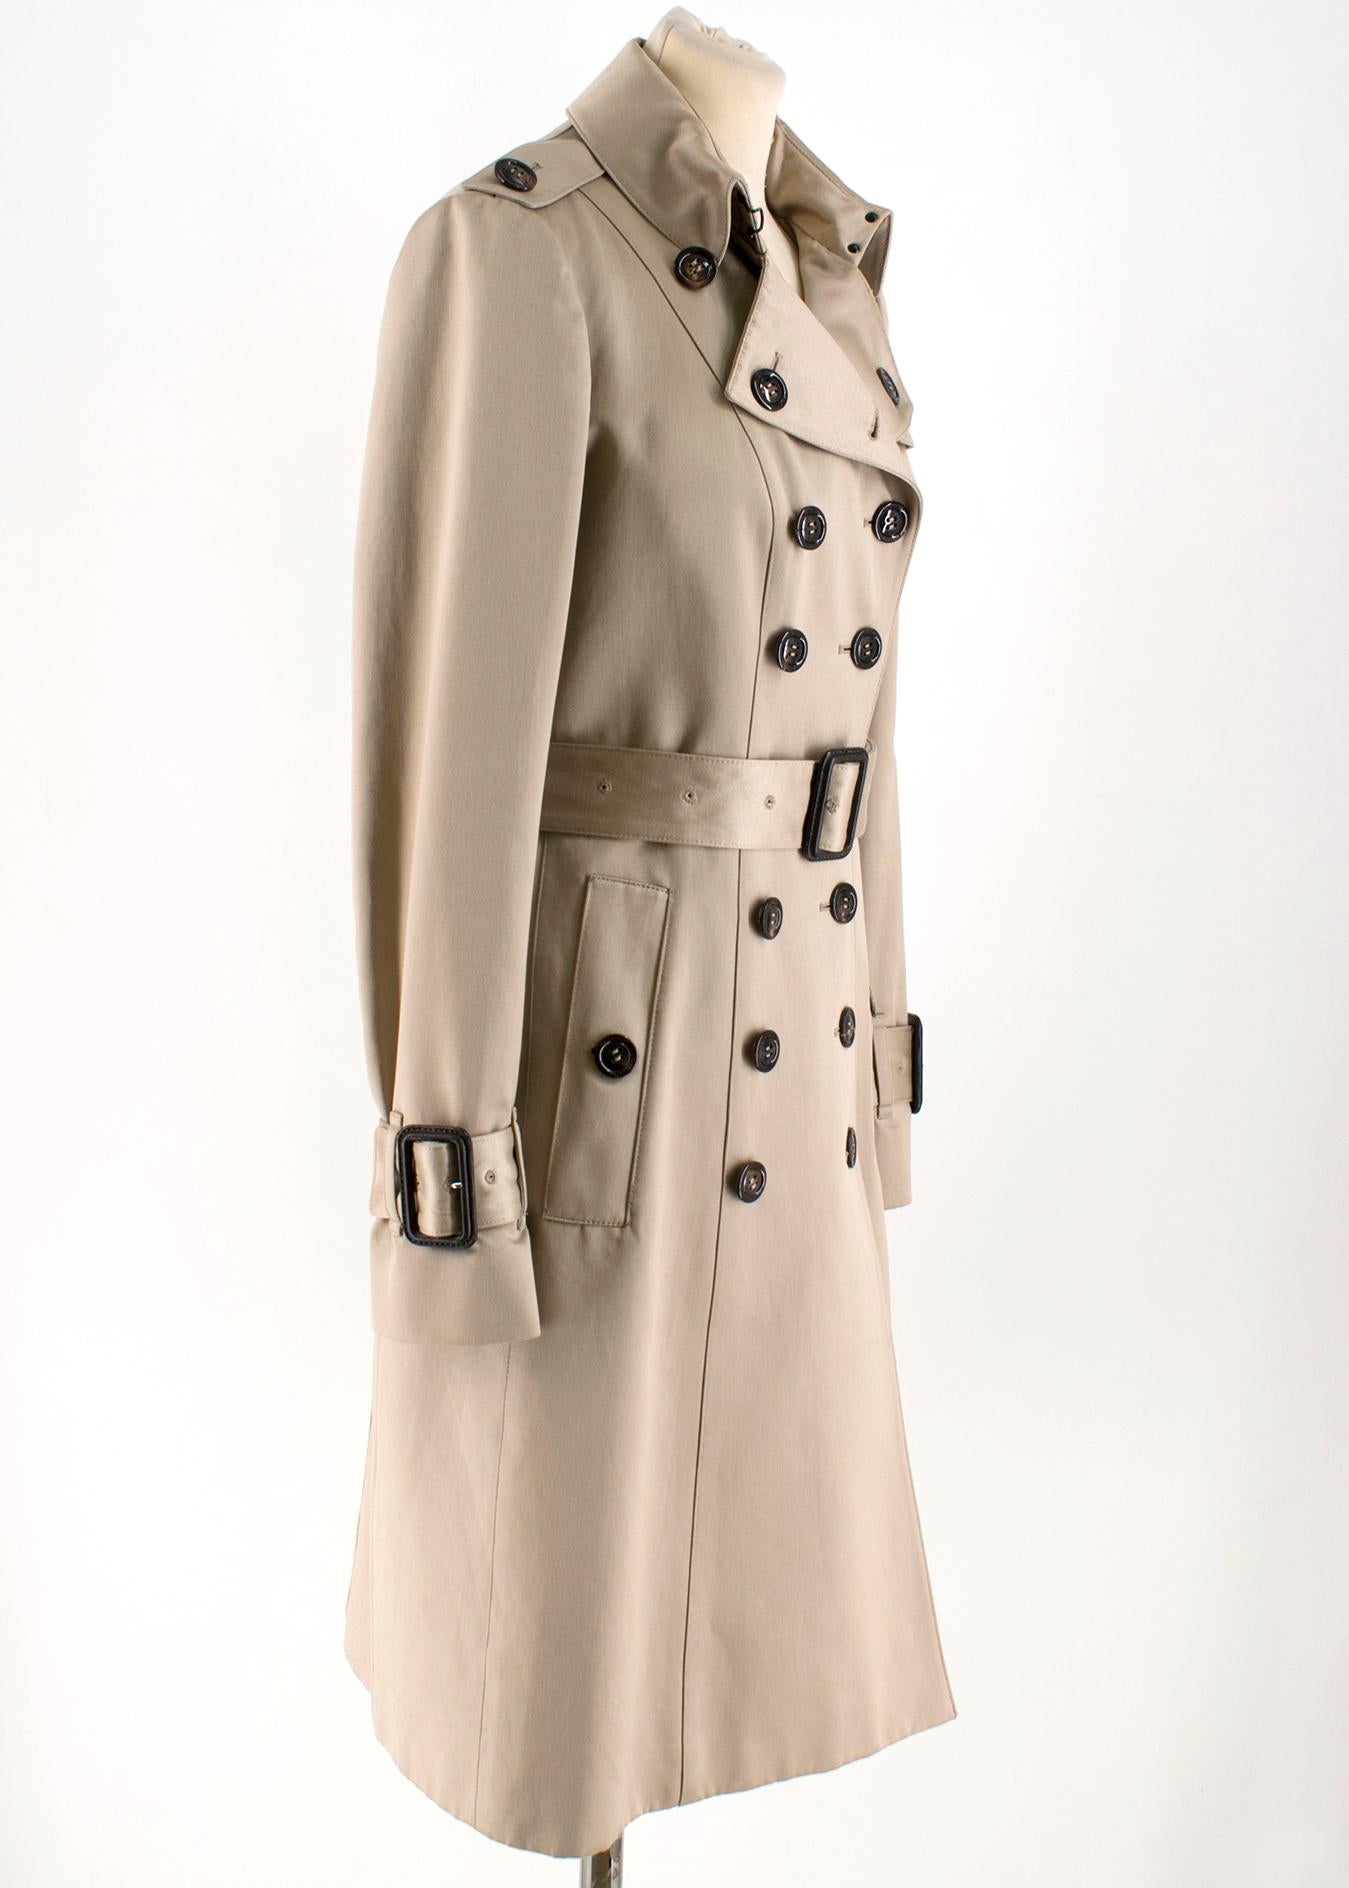 Burberry Beige Trench Coat 

- Classic Beige Trench Coat
- Woven Cotton Sateen 
- Softly tailored slim fit cut
- Double-breasted
- Dark horn buttons down center front 
- Point lapel
- Belted cuffs, belted waist
- 100% Cotton

Please note, these